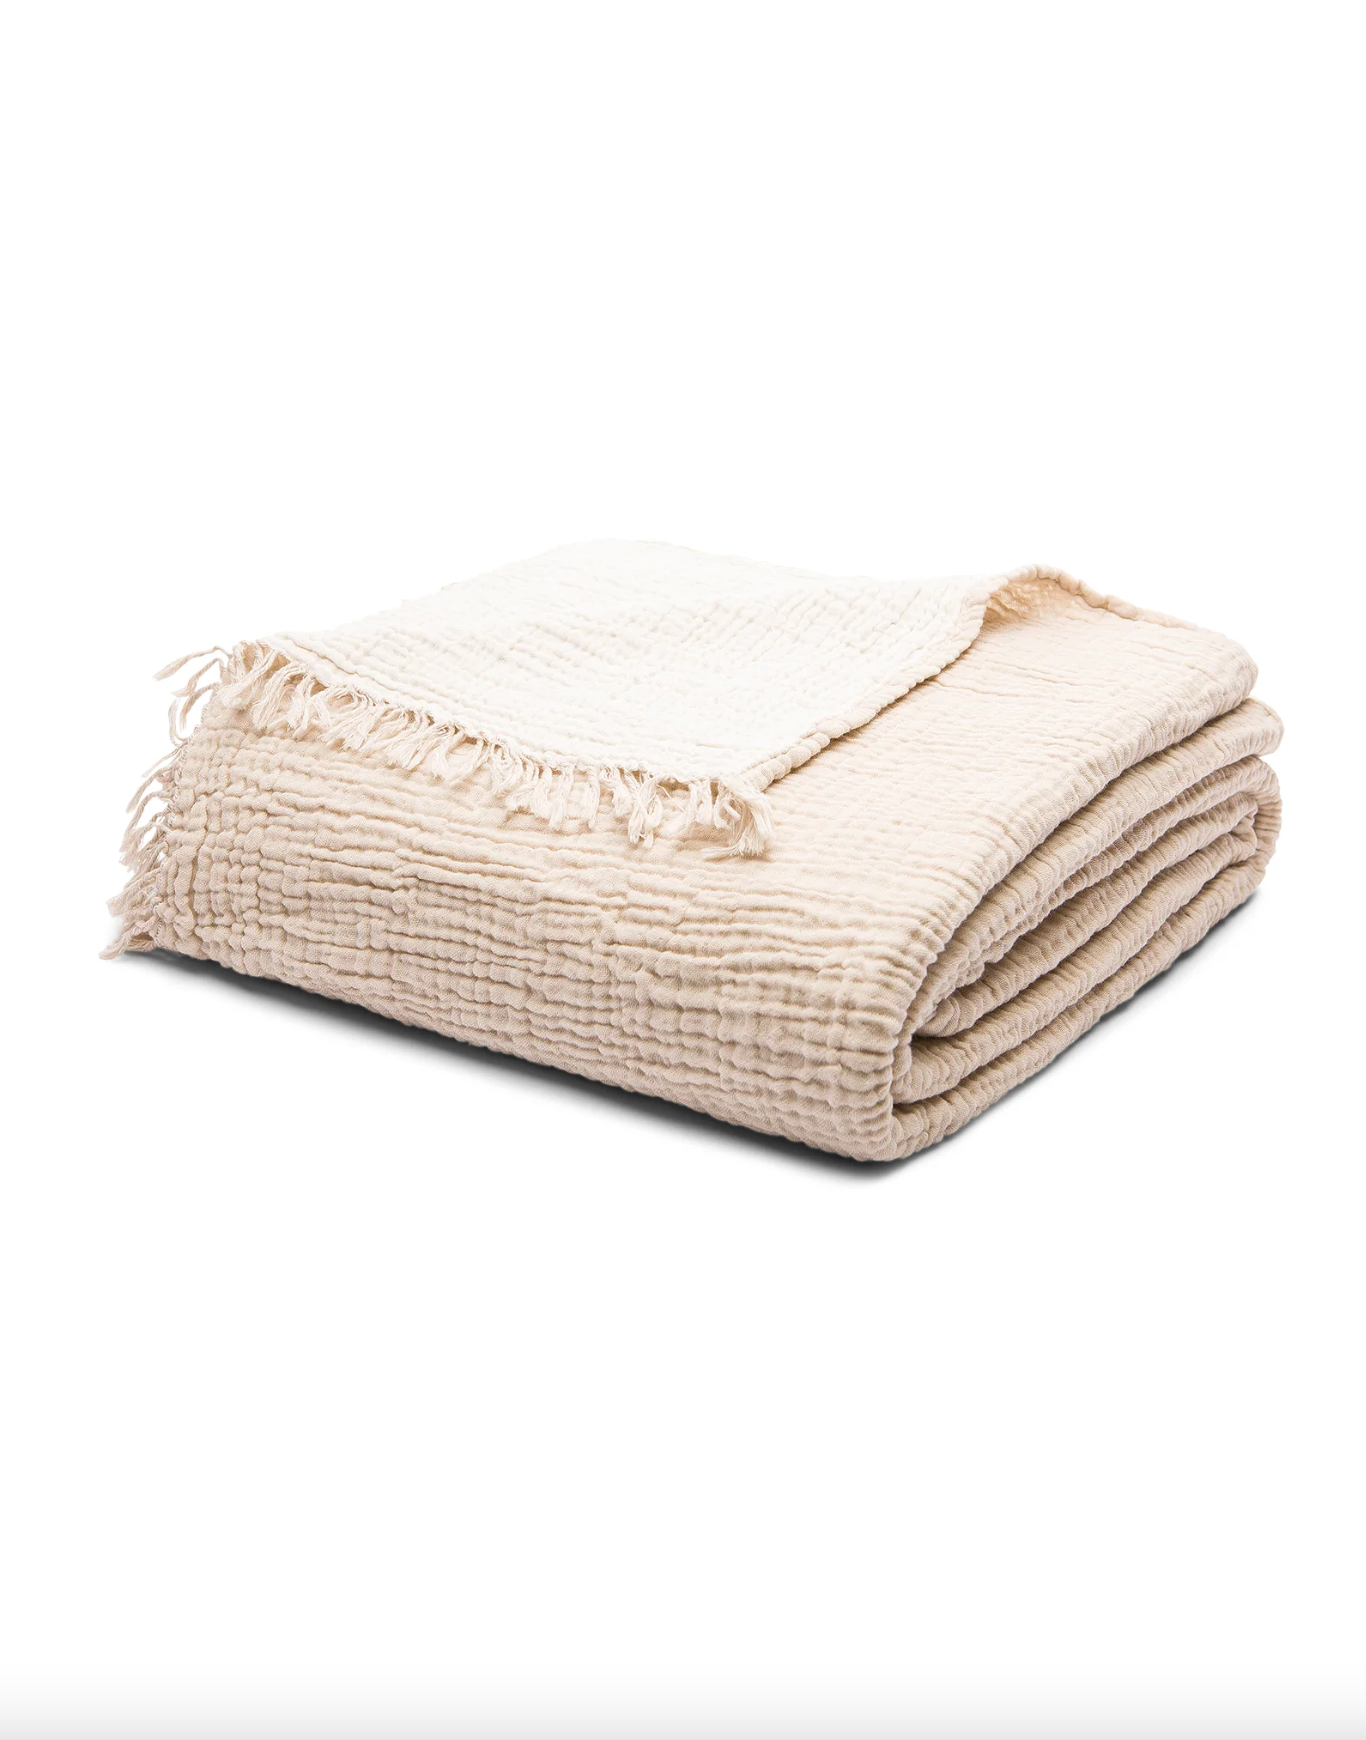 Alaia Bedspread in Oyster